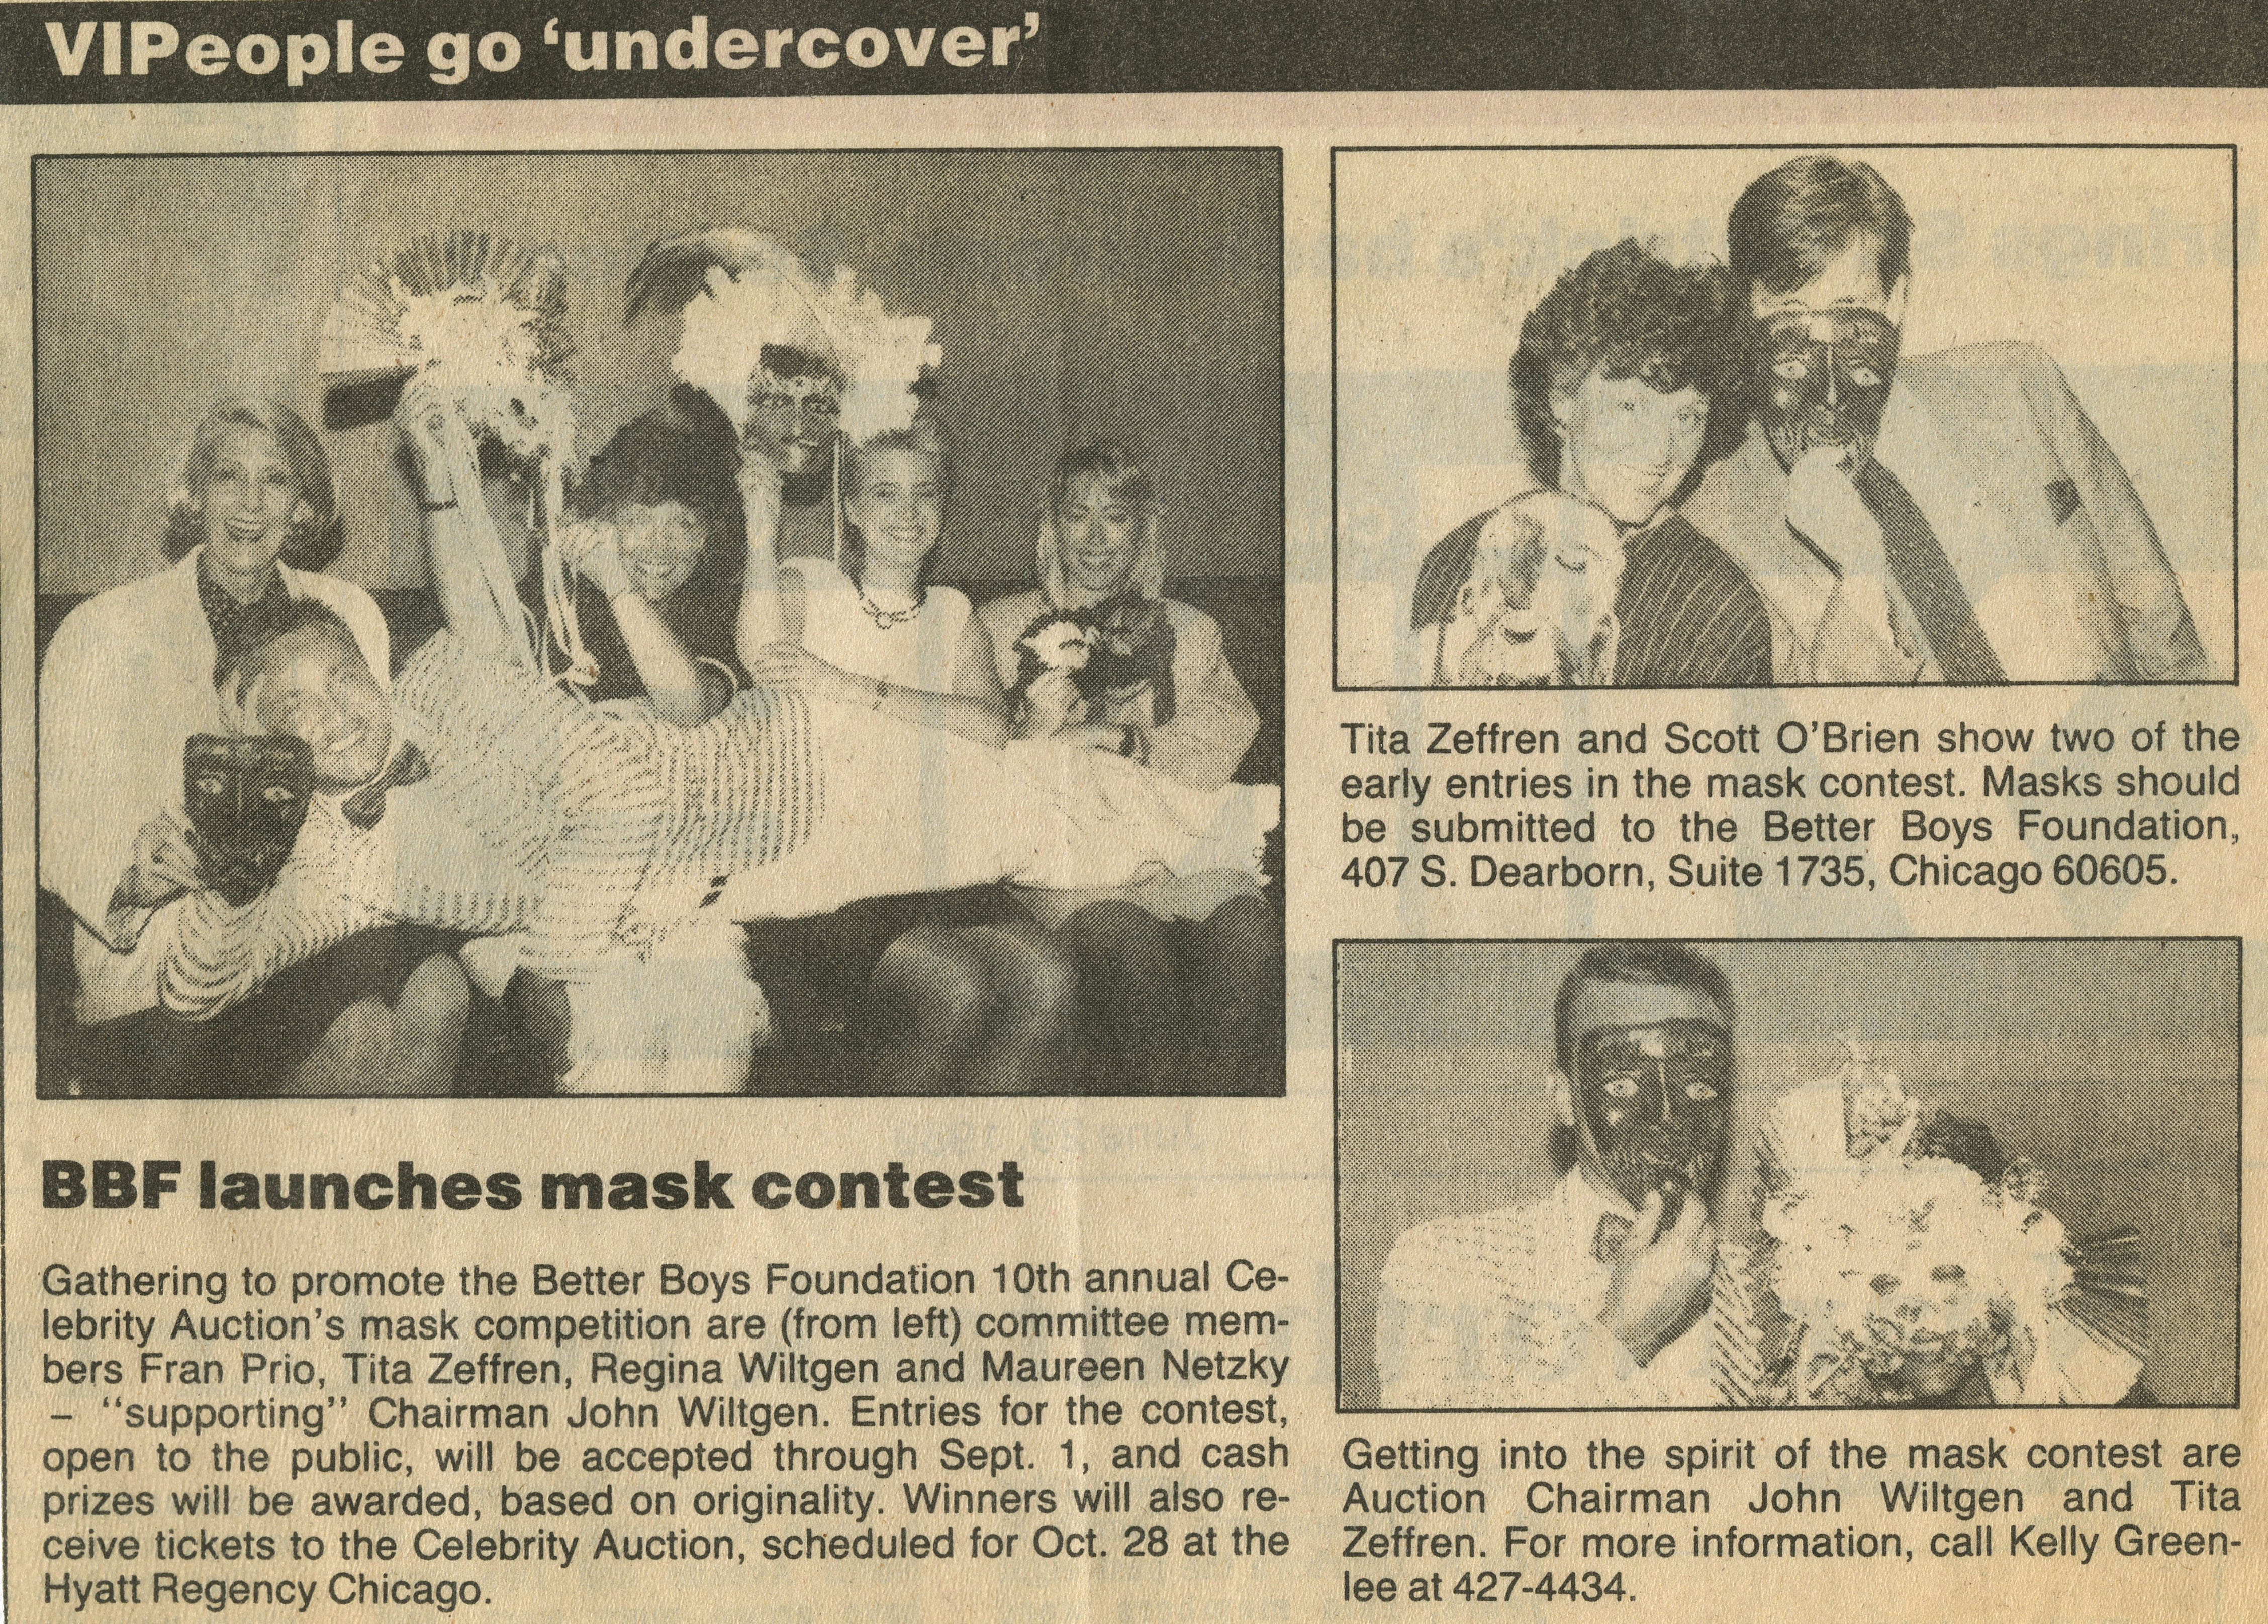 June 29, 1989 VIPeople Go Undercover